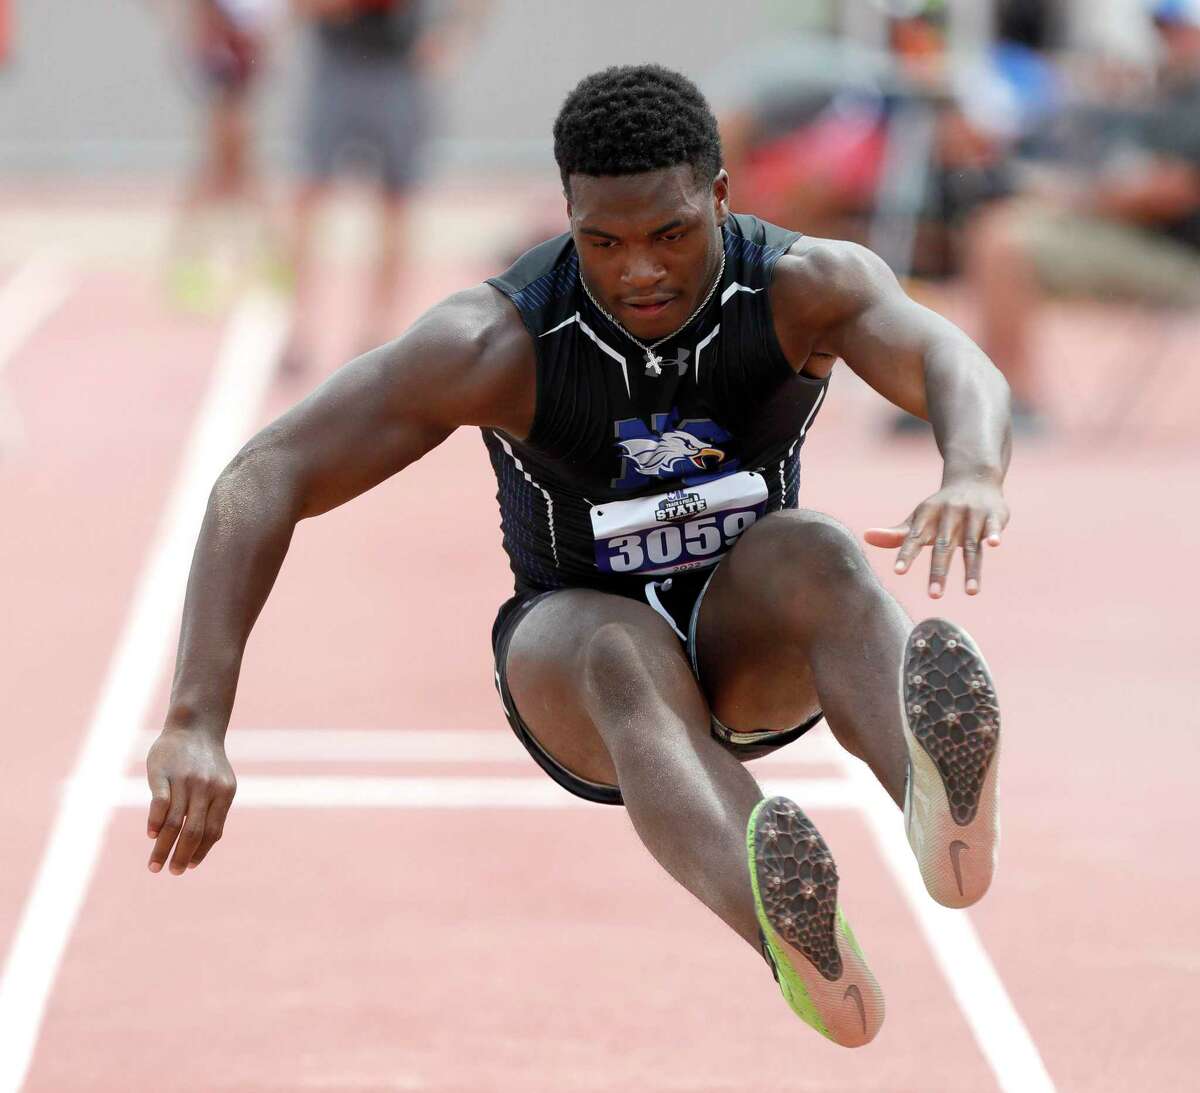 Kedrick Reescano of New Caney competes in the Class 5A boys triple jump during the UIL State Track & Field Championships at Mike a Myers Stadium, Friday, May 13, 2022, in Austin.